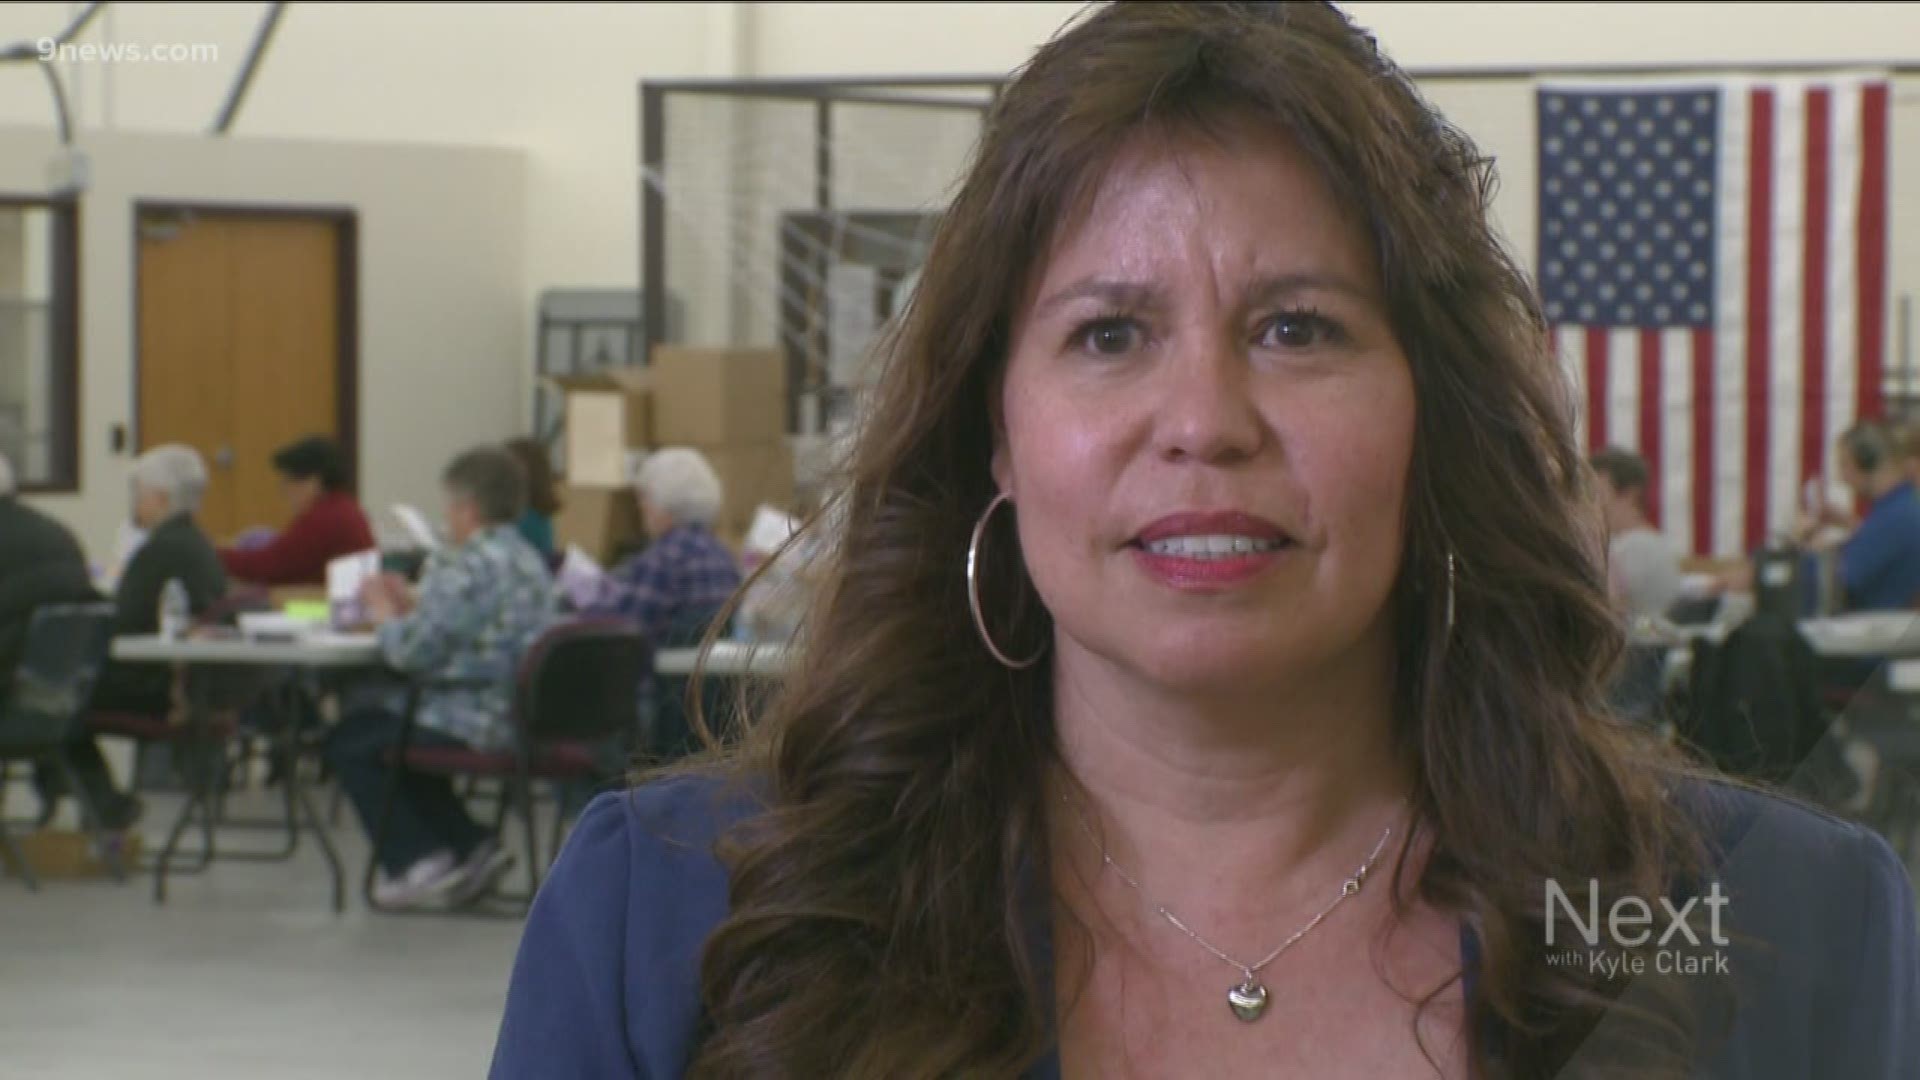 Lopez just made it through running her first election, and she's facing a call for her resignation, concerns from candidates of both parties and an ethics complaint.